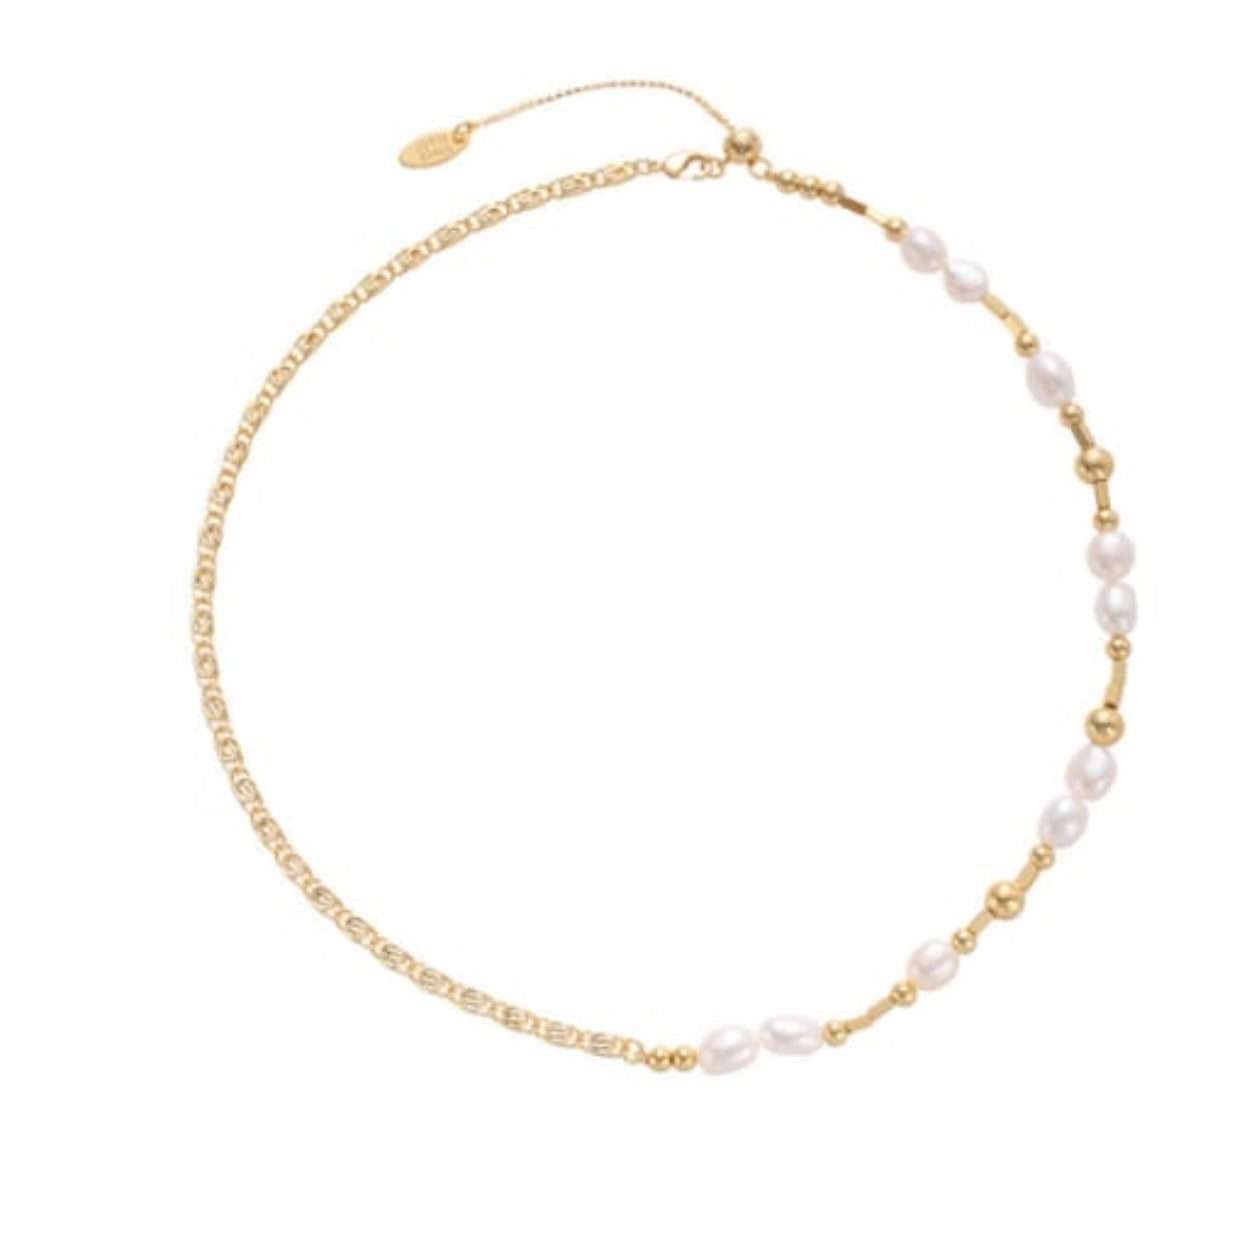 ISABELLA LINK CHAIN FRESHWATER PEARLS NECKLACE